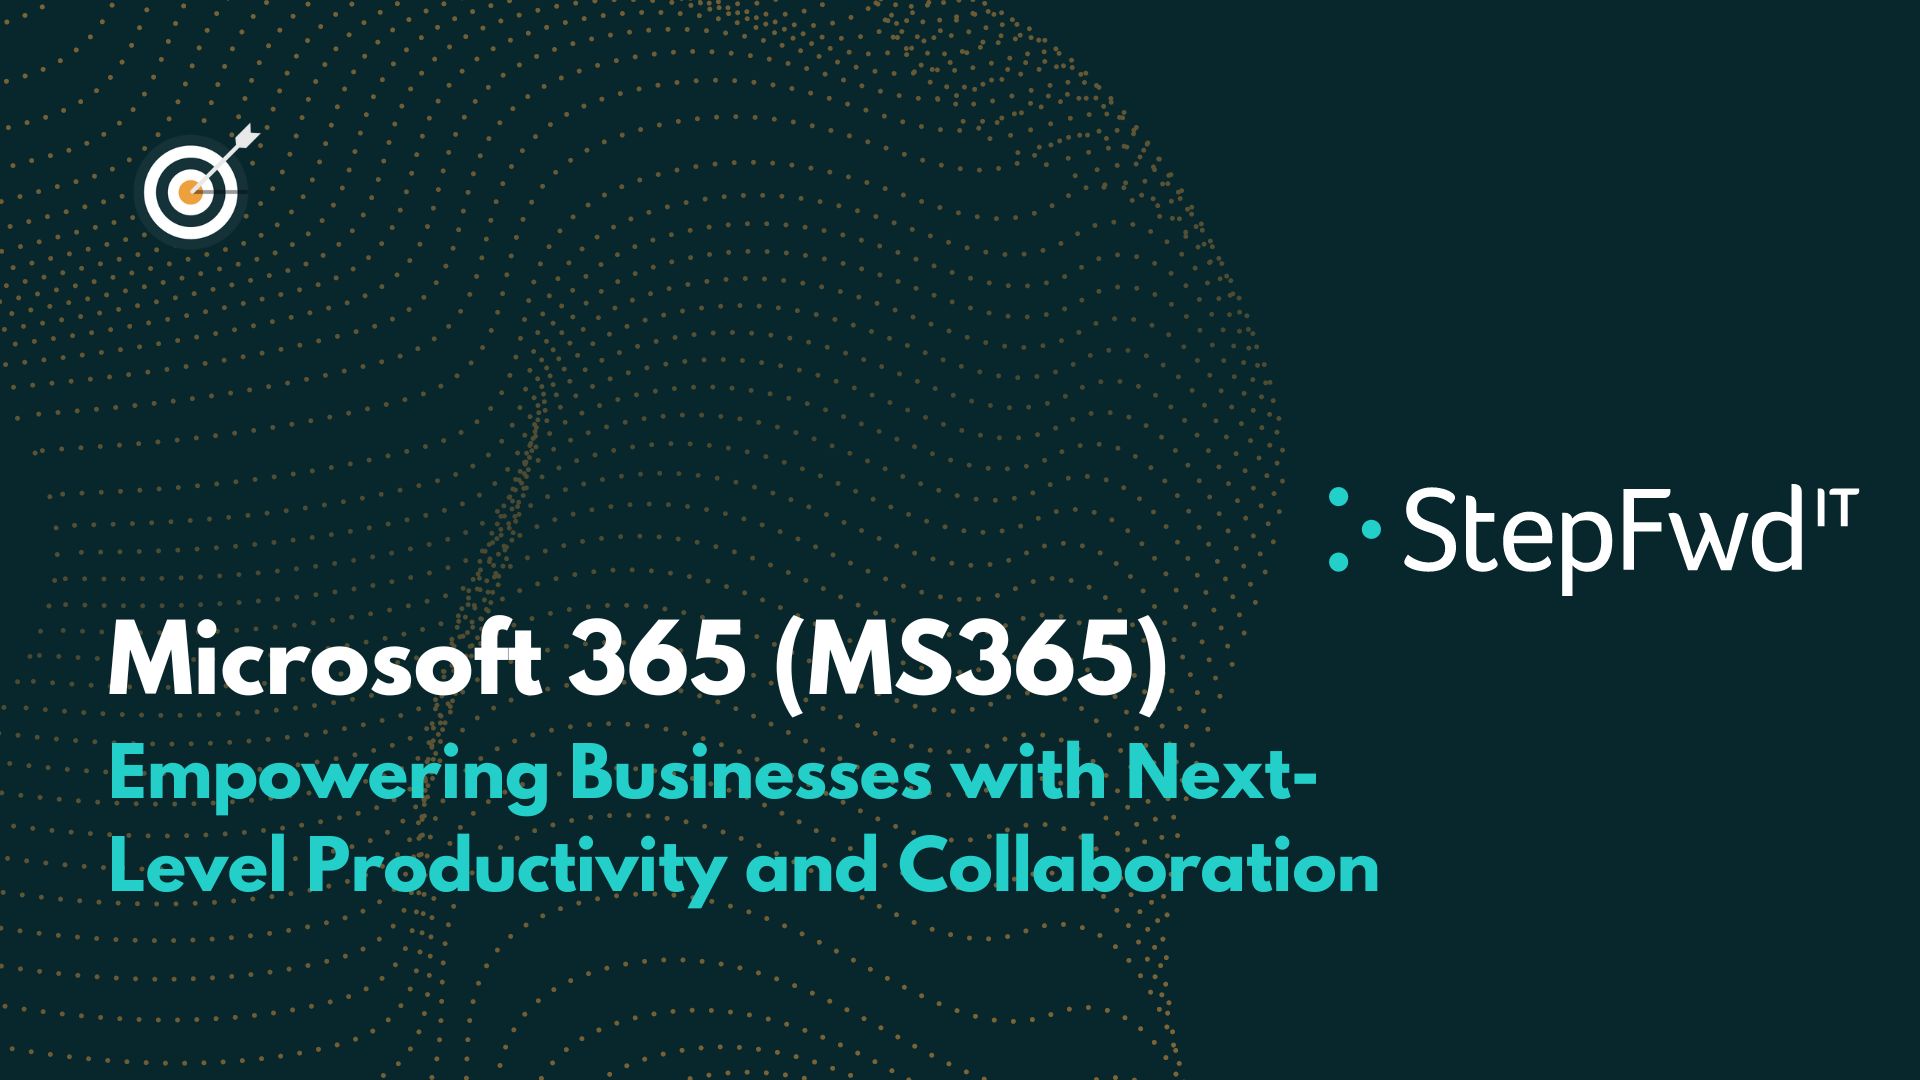 MS365: Empowering Businesses with Next-Level Productivity and Collaboration